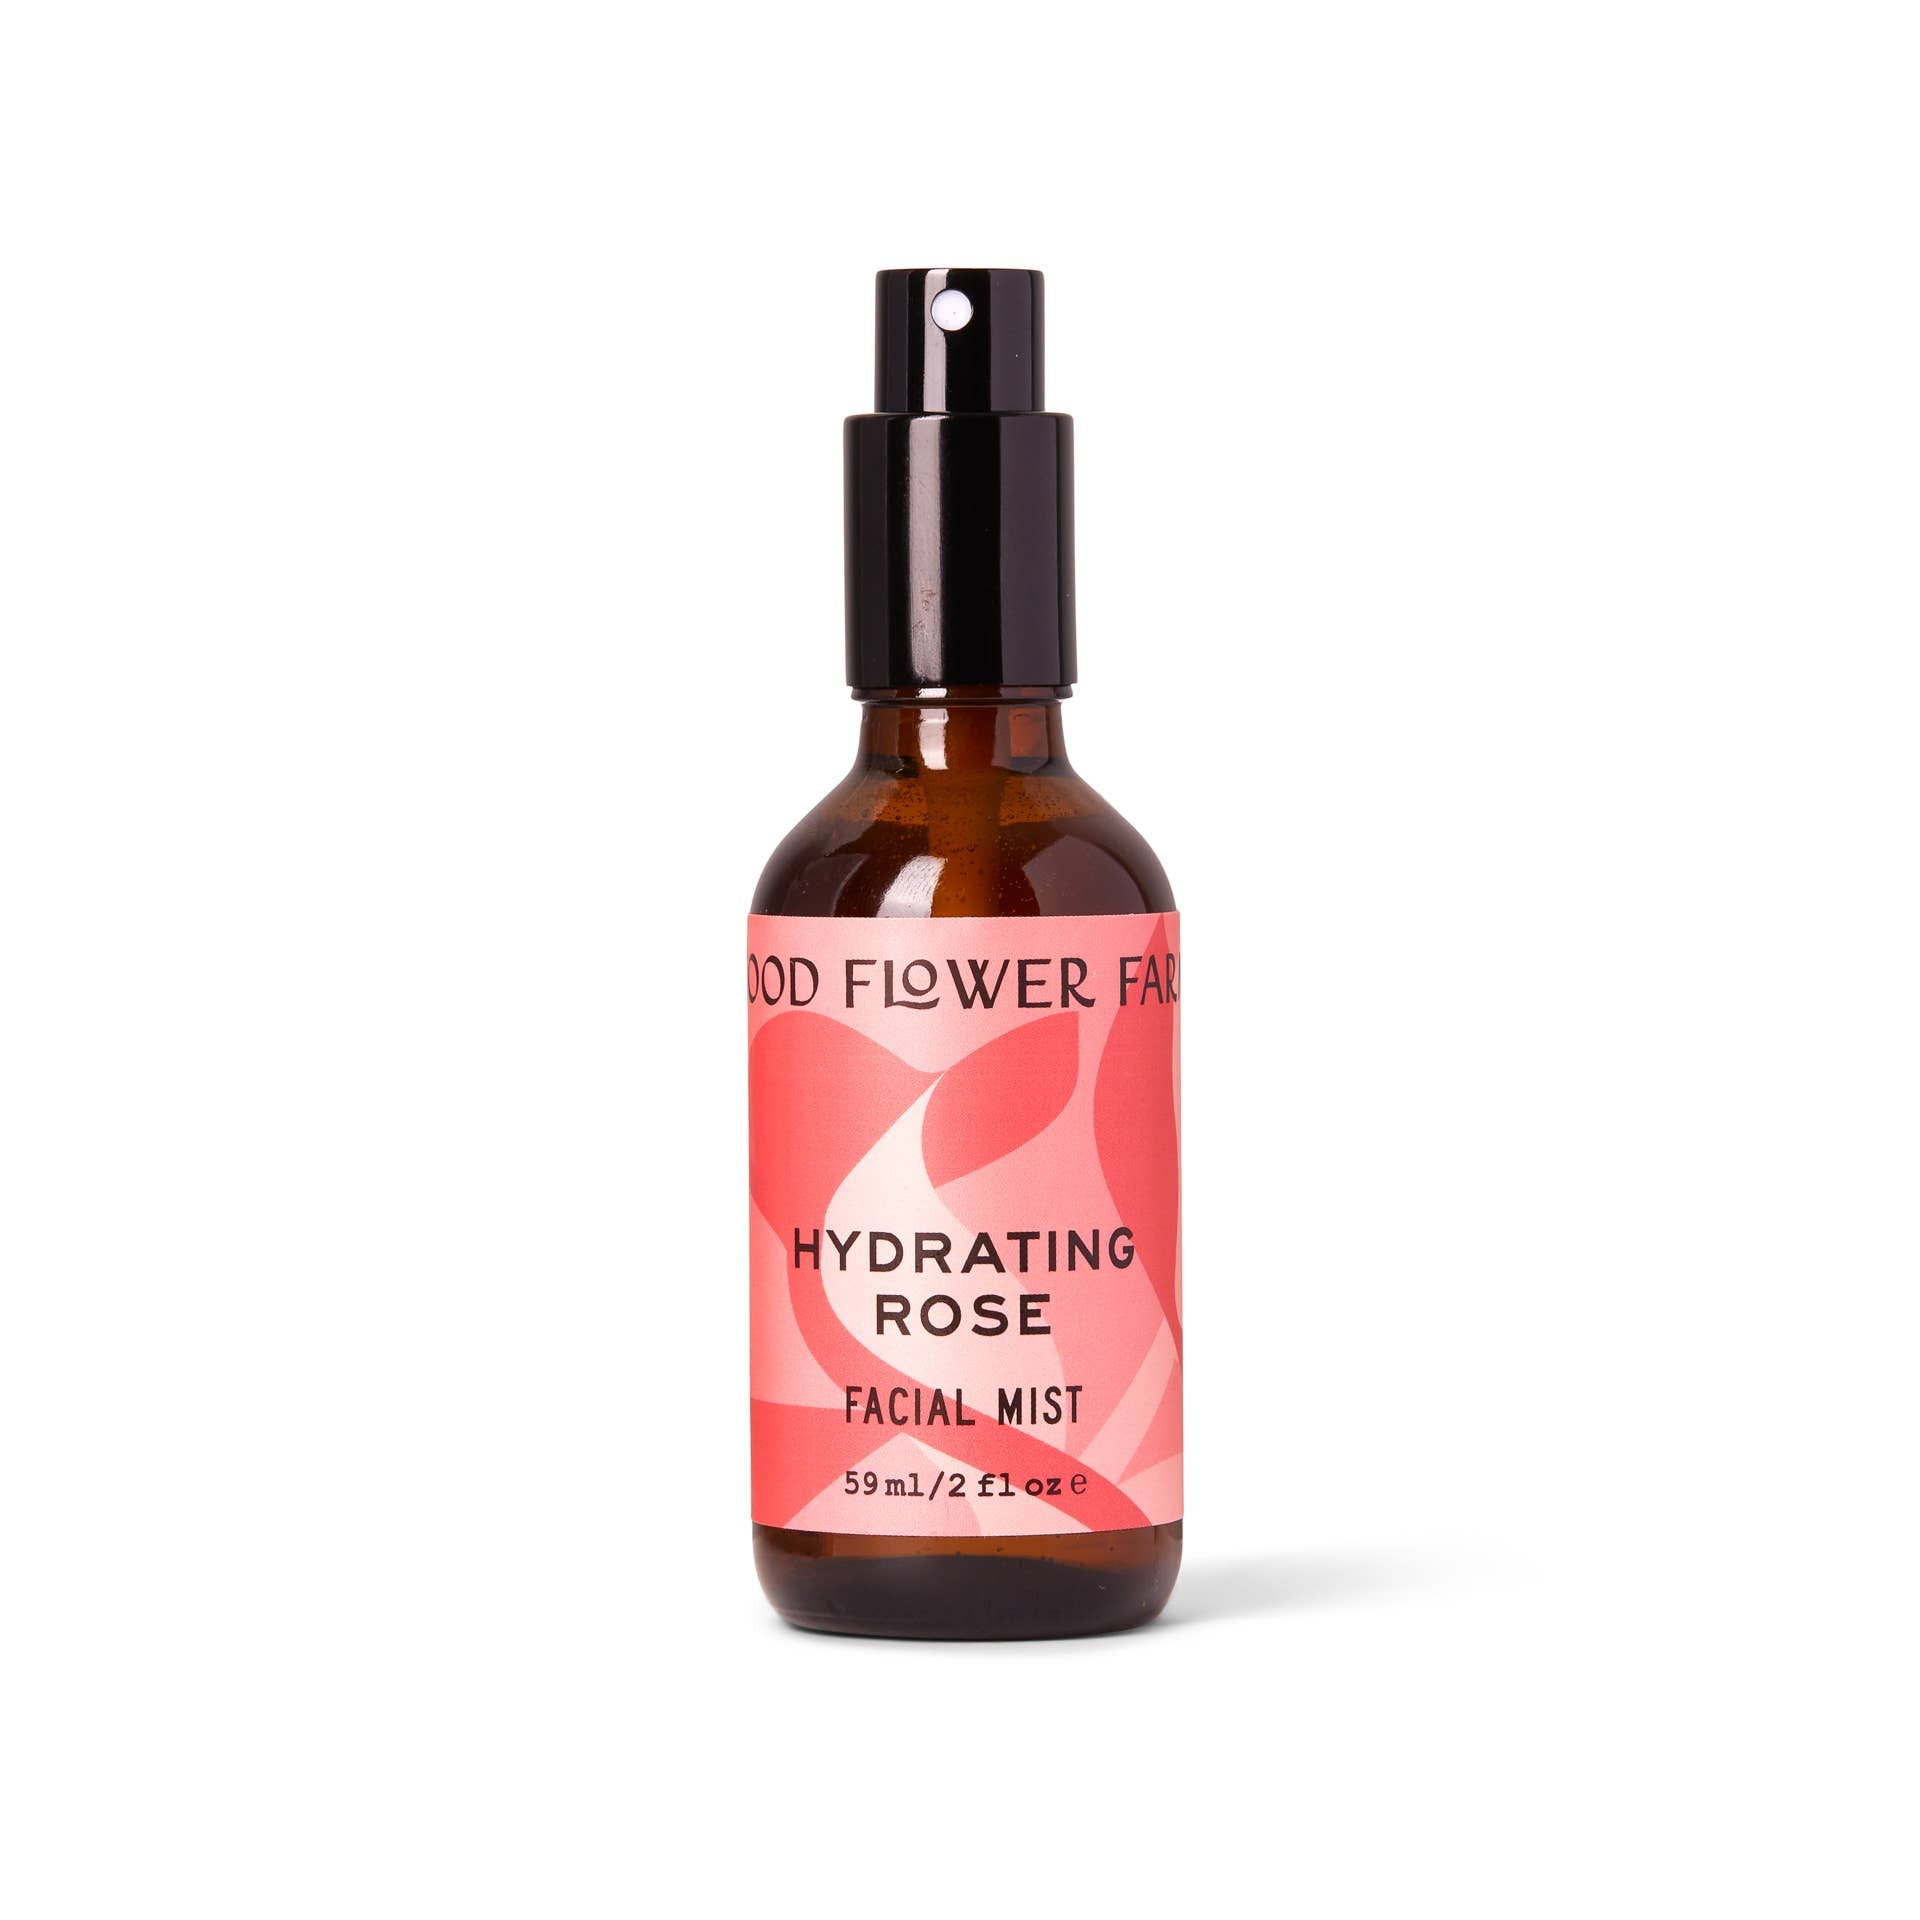 Hydrating Rose Facial Mist / 2 oz - The Crowd Went Wild